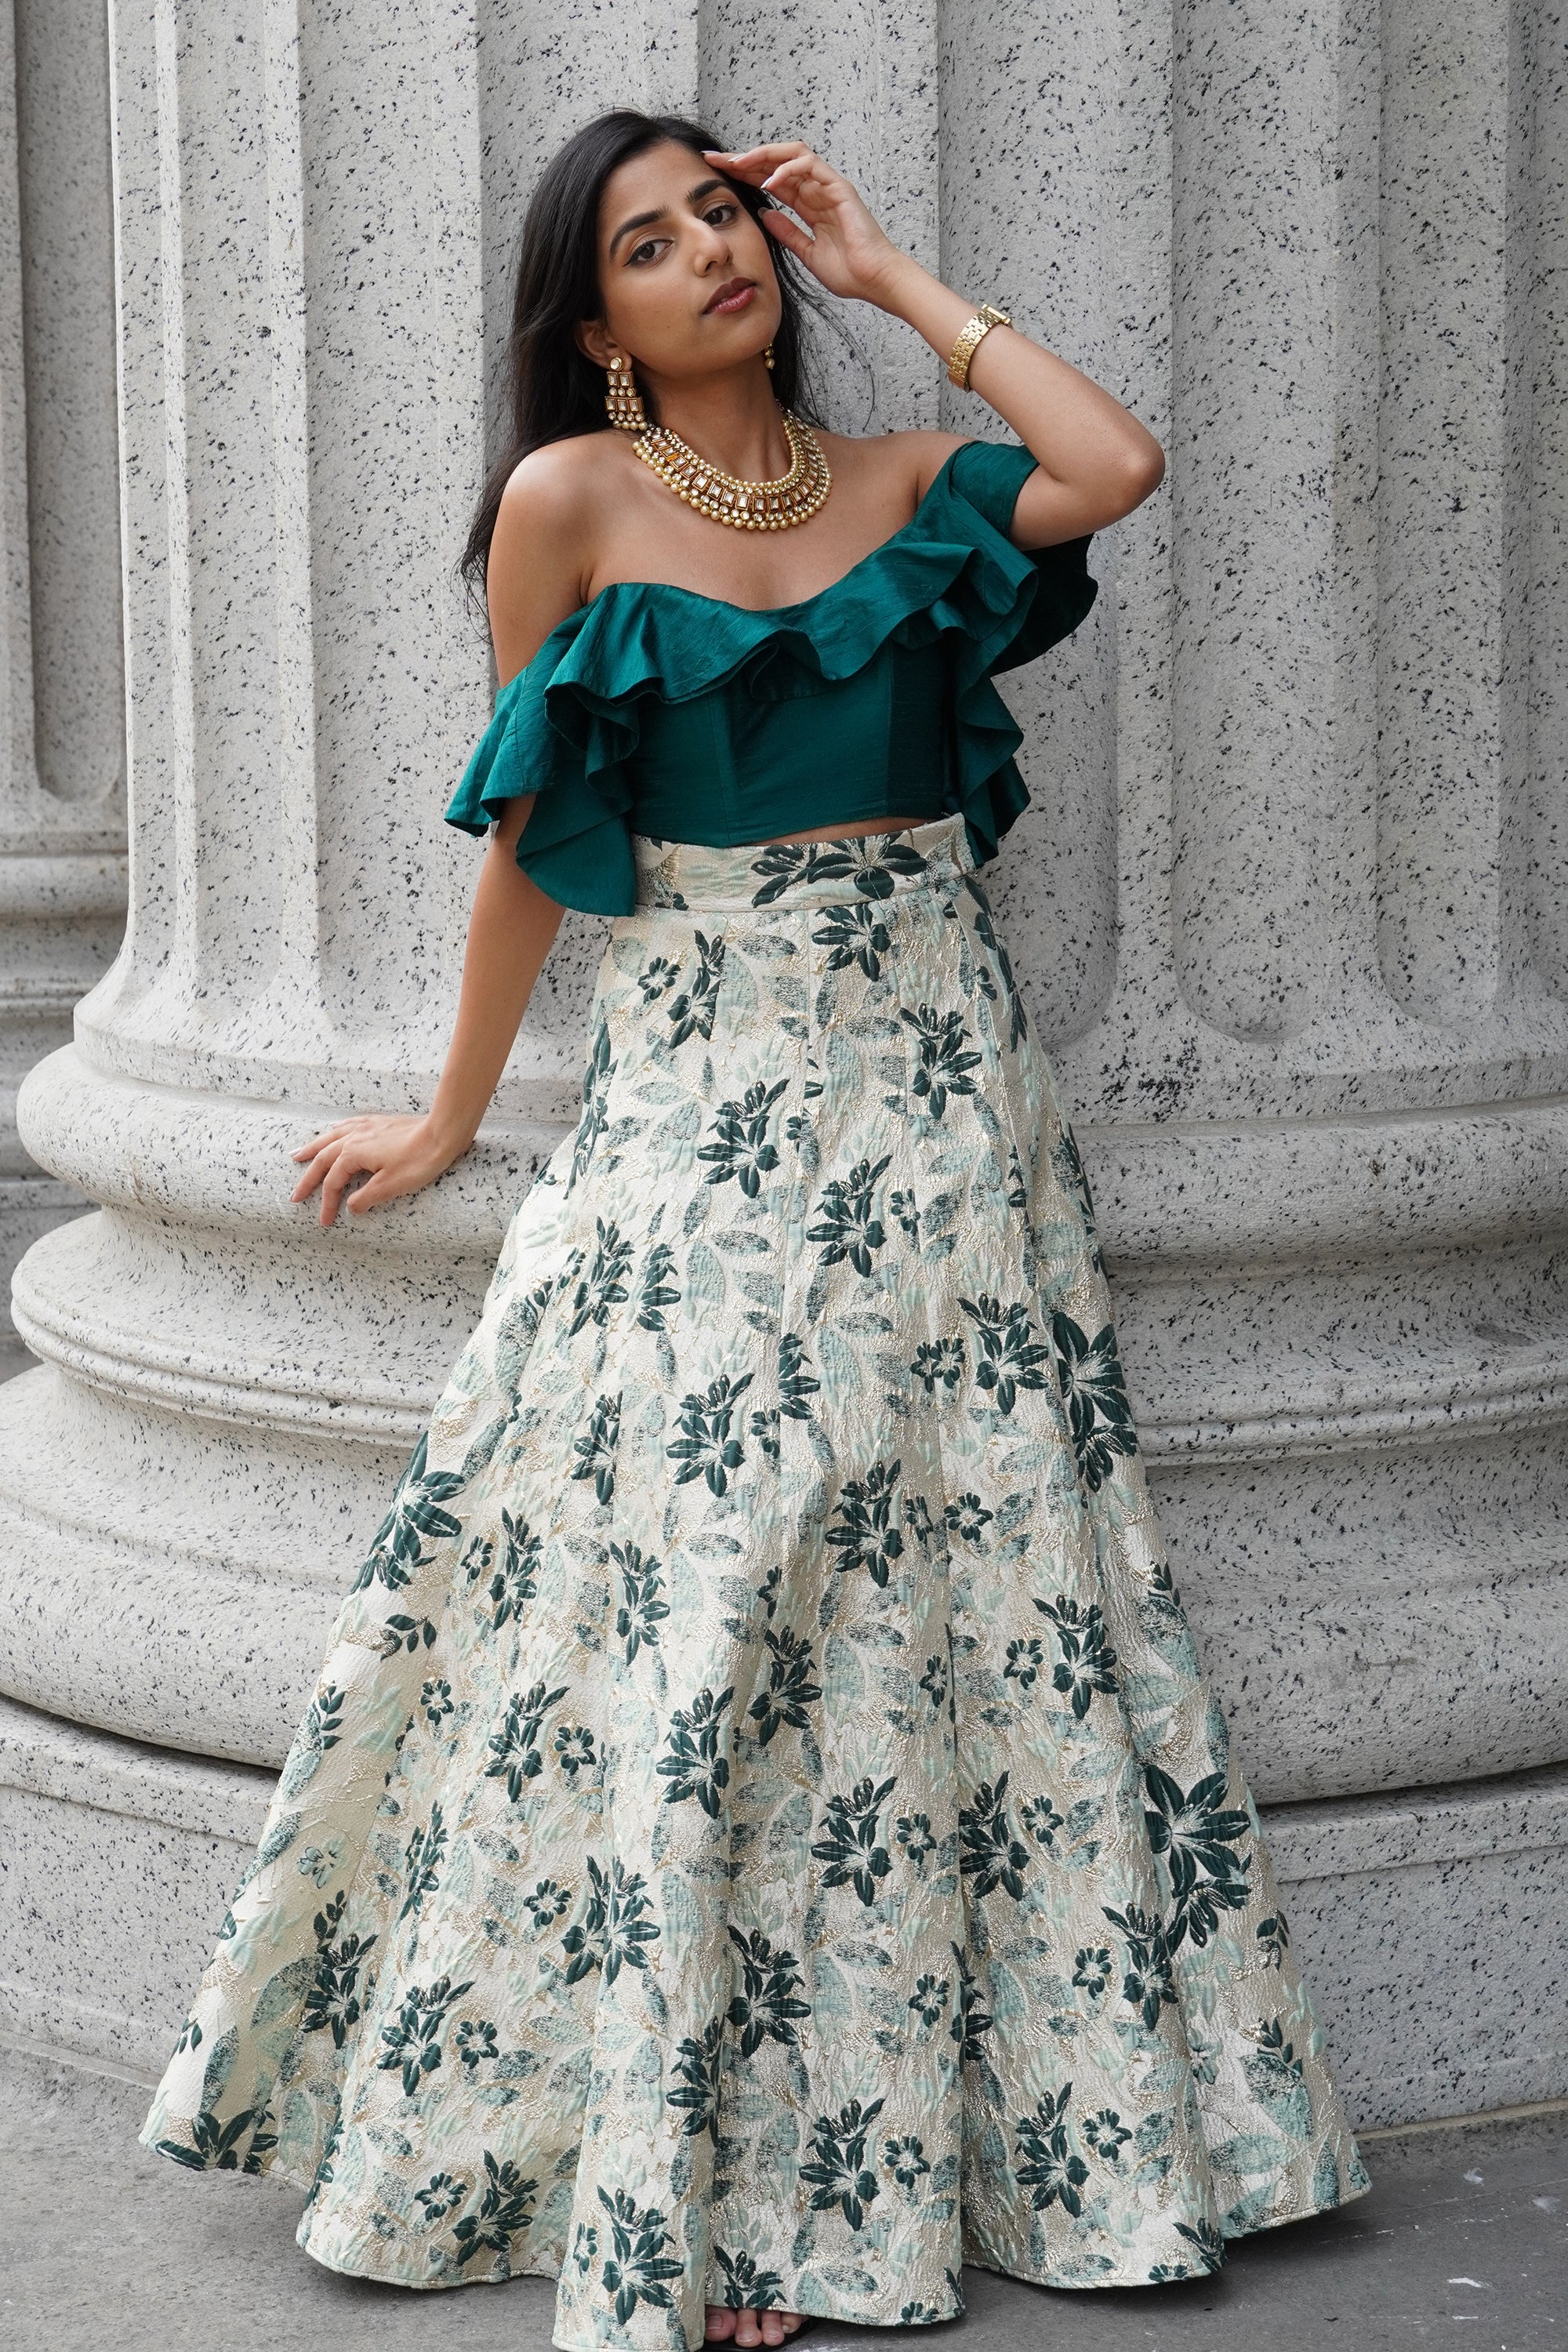 AVNI Green and Mint Floral Jacquard Skirt Ready to Ship